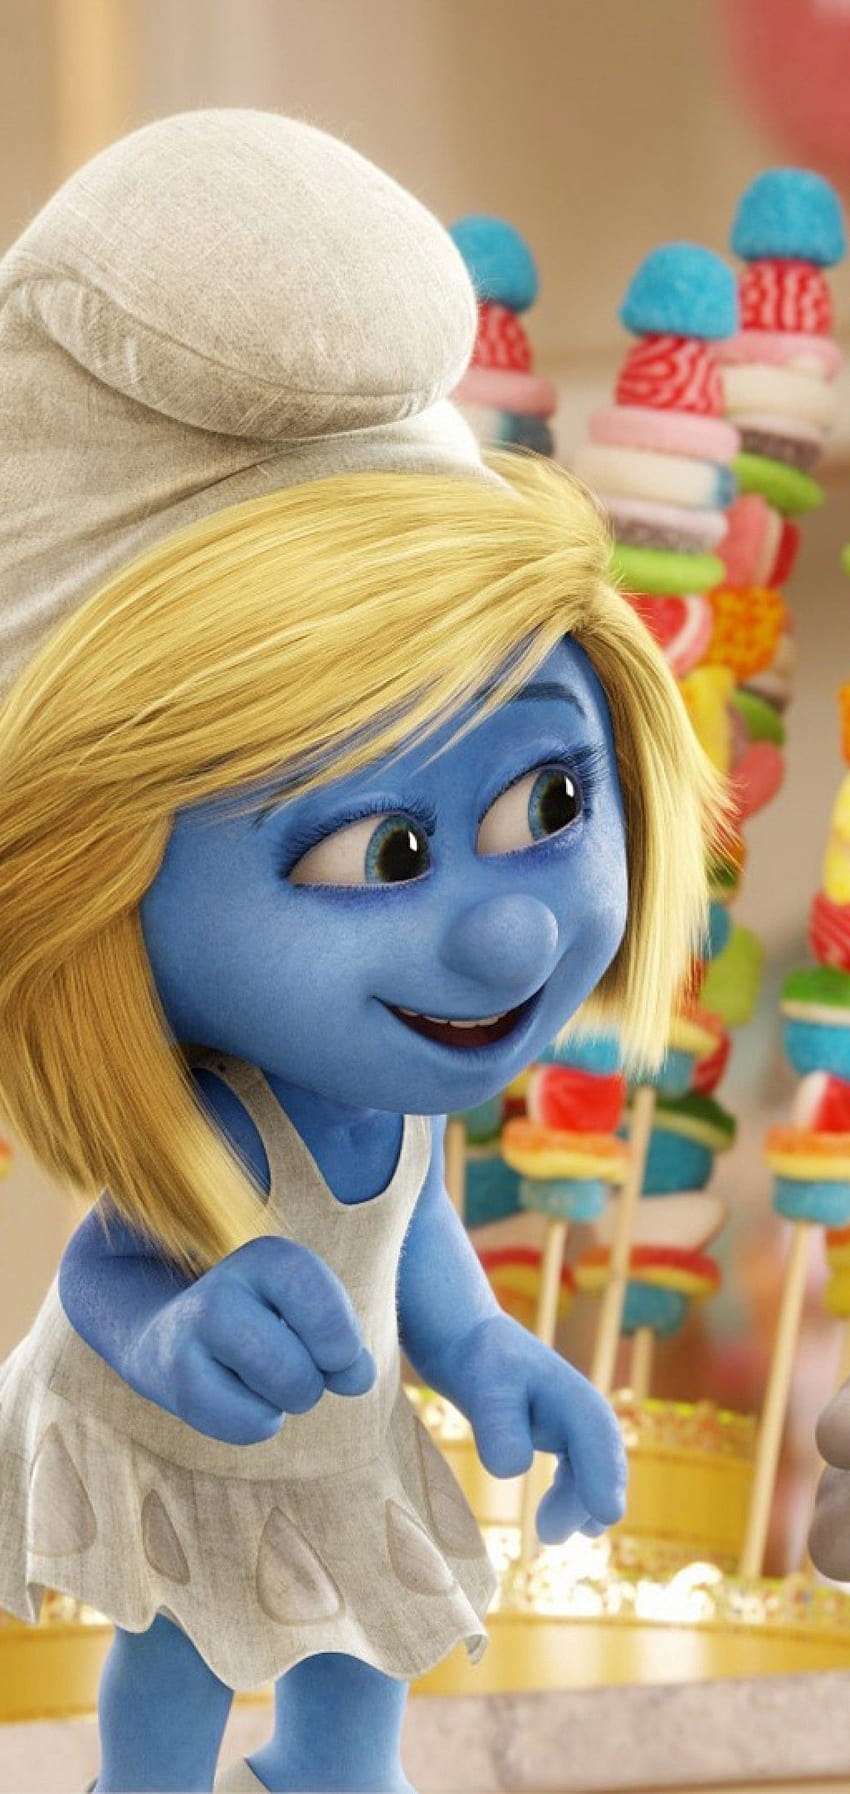 1440x3040 The Smurfs 2, Smurfette, Animation for Samsung Galaxy Note 1 Plus & S10 Plus HD phone wallpaper